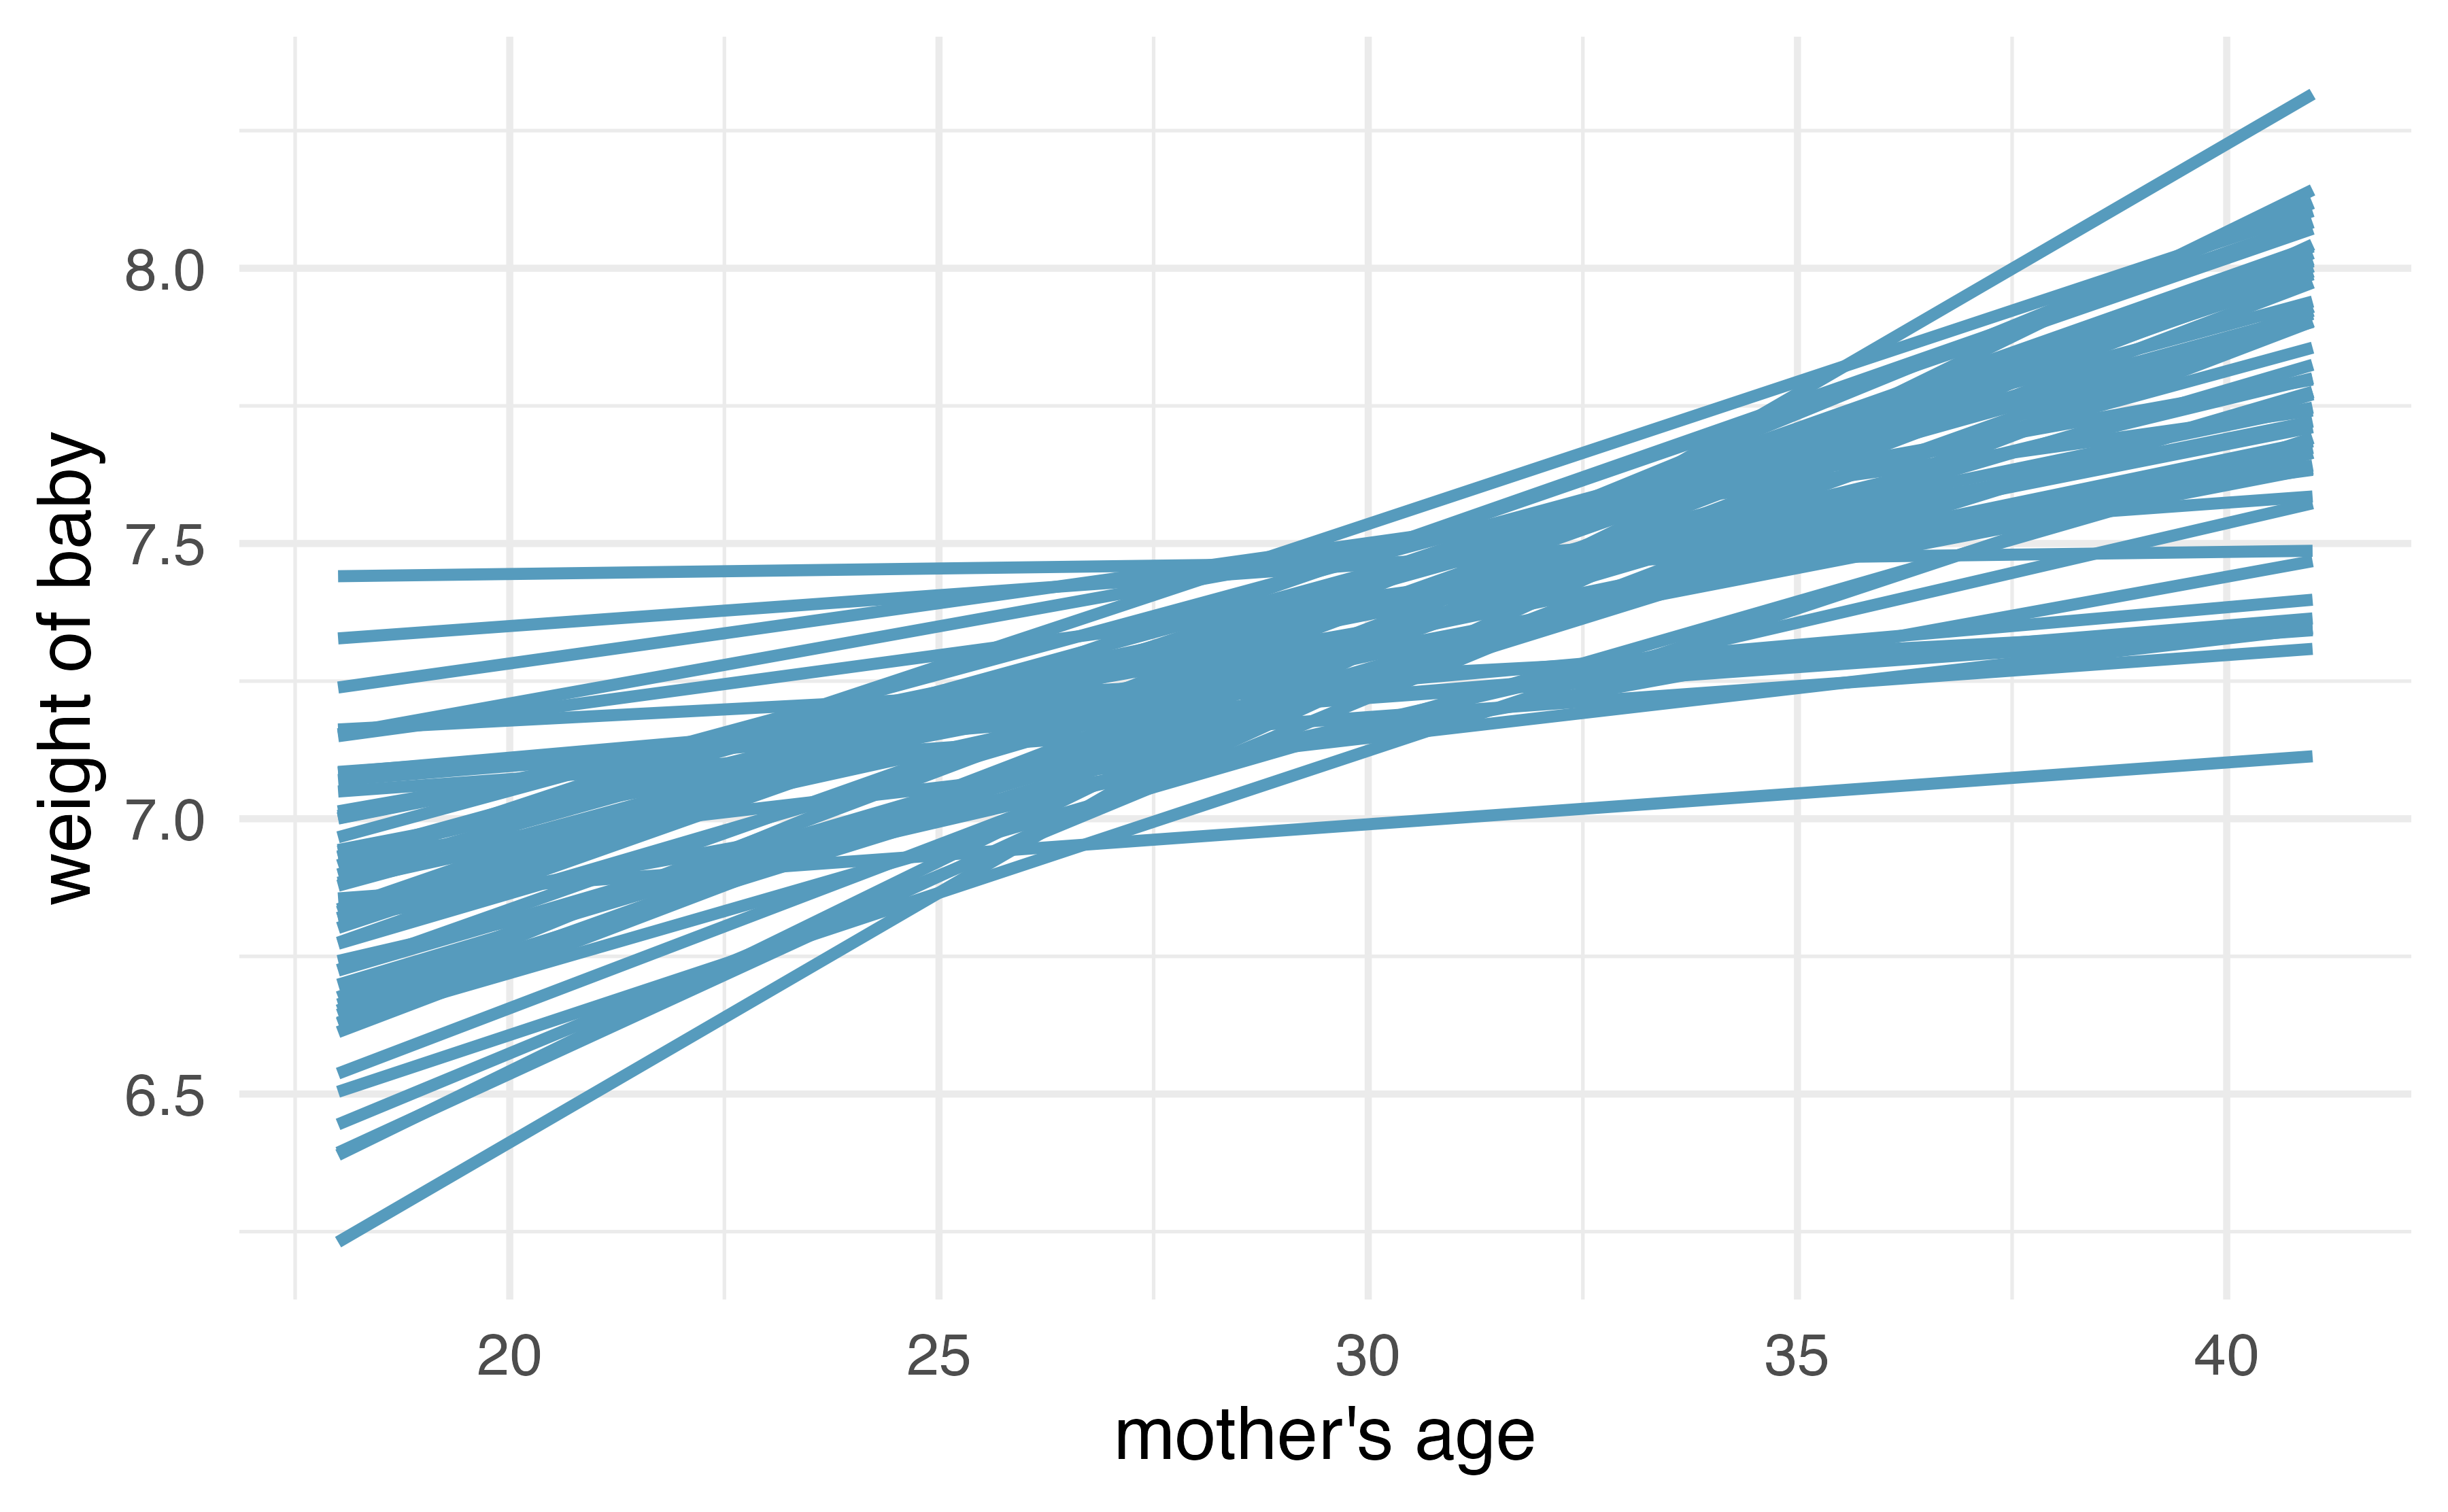 An x-y coordinate system with least squares regression lines from many bootstrap samples (no points are plotted).  The lines vary around the observed population line.  On the x-axis is mother's age; on the y-axis is baby's weight